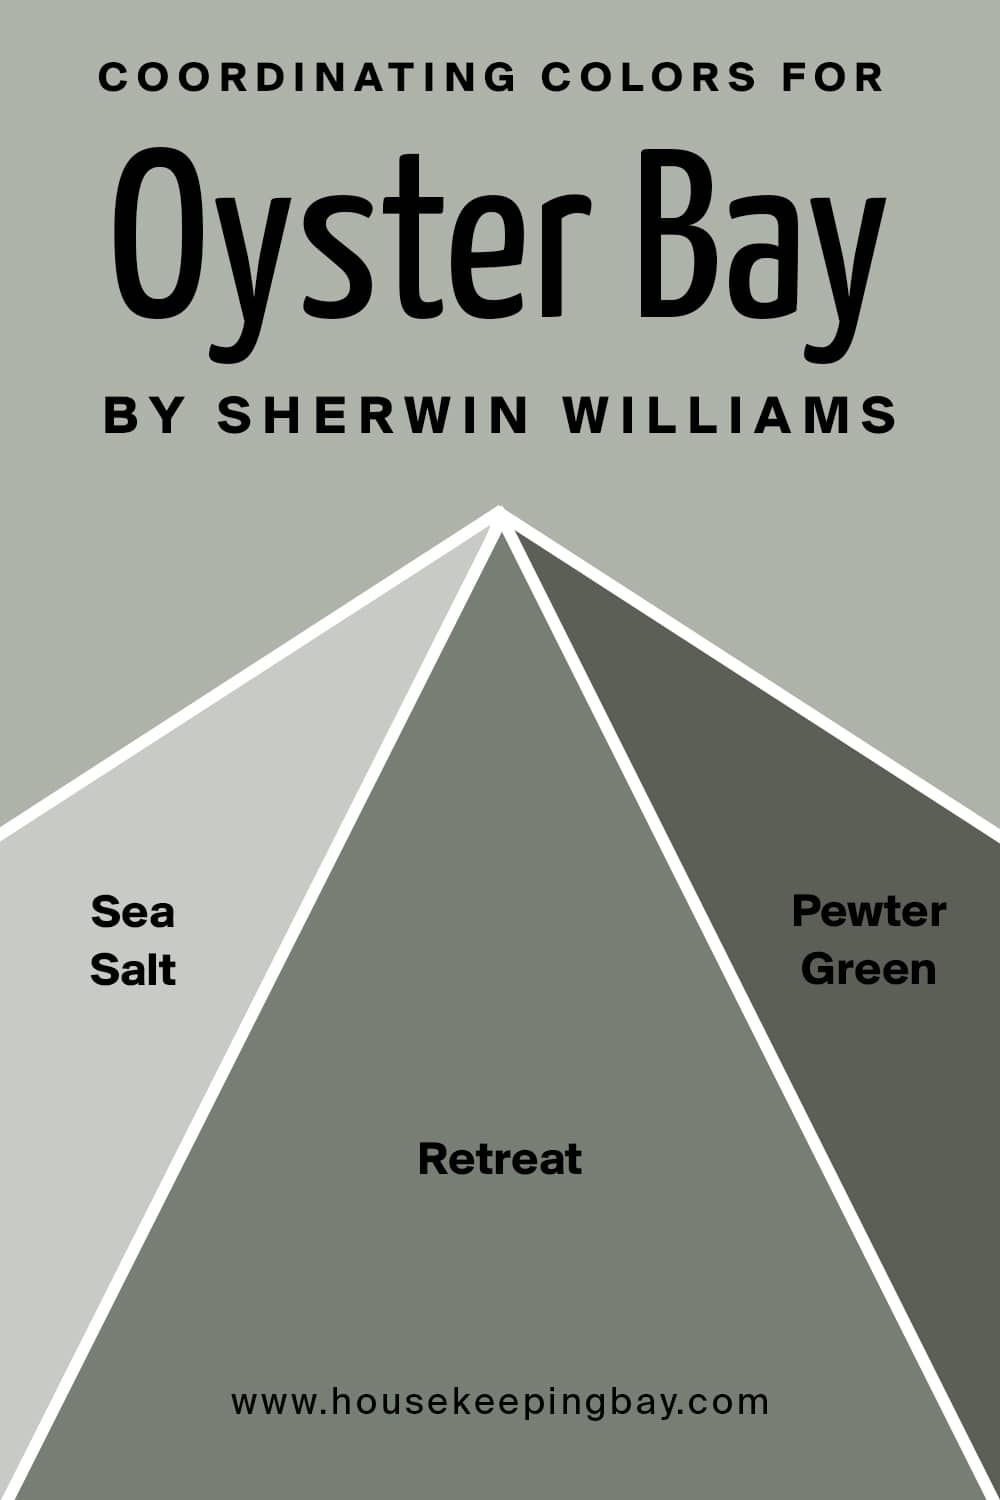 Coordinating Colors for Oyster Bay by Sherwin Williams